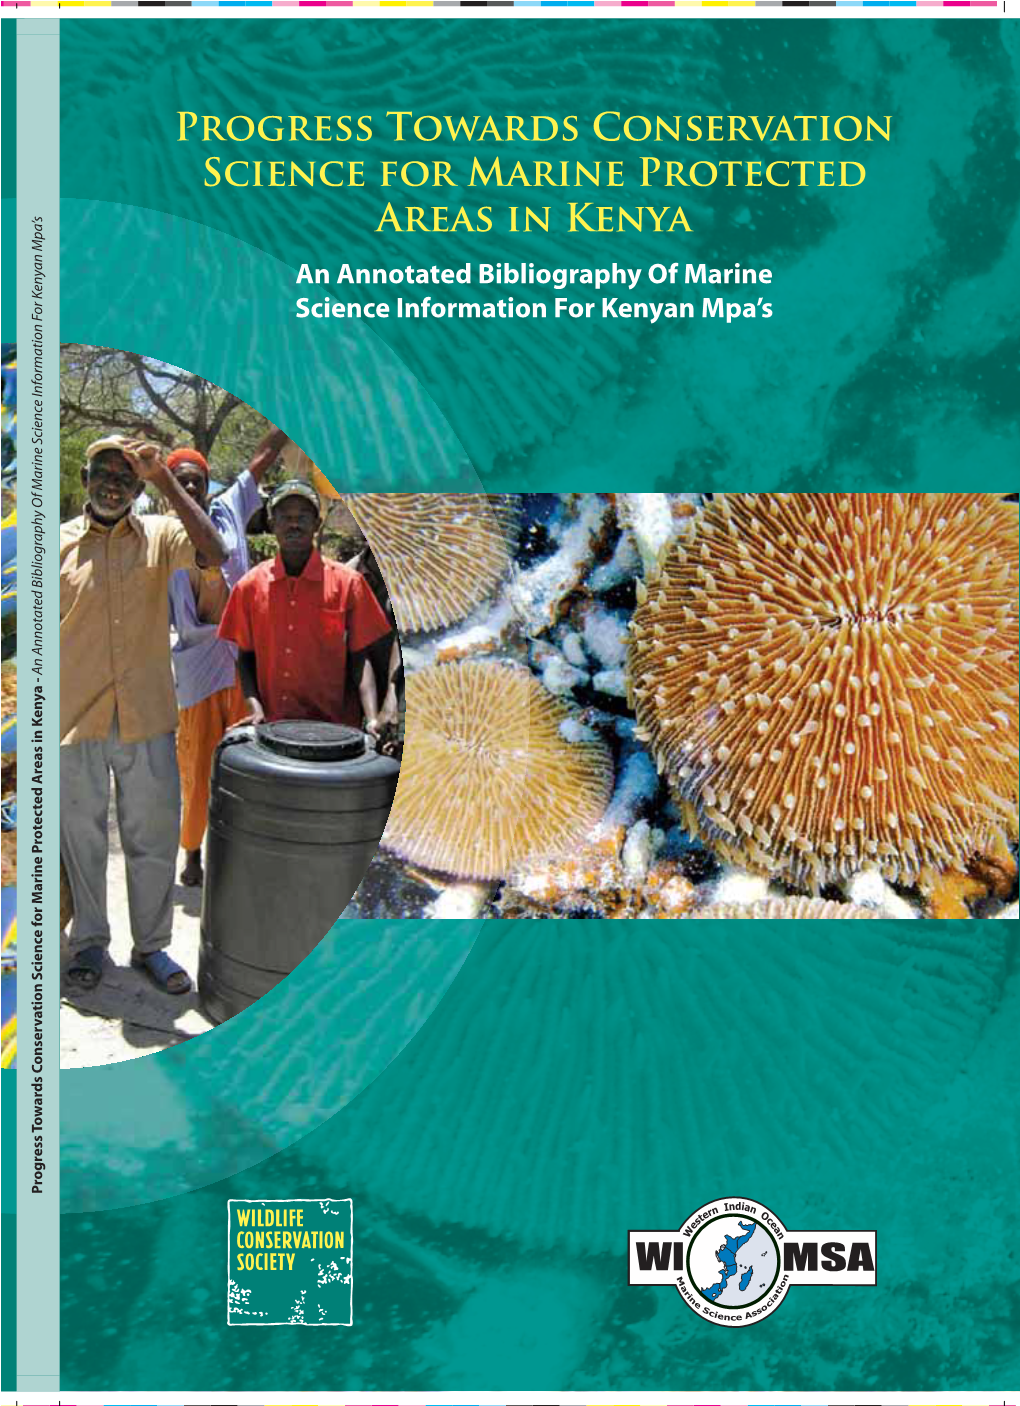 Progress Towards Conservation Science for Marine Protected Areas in Kenya